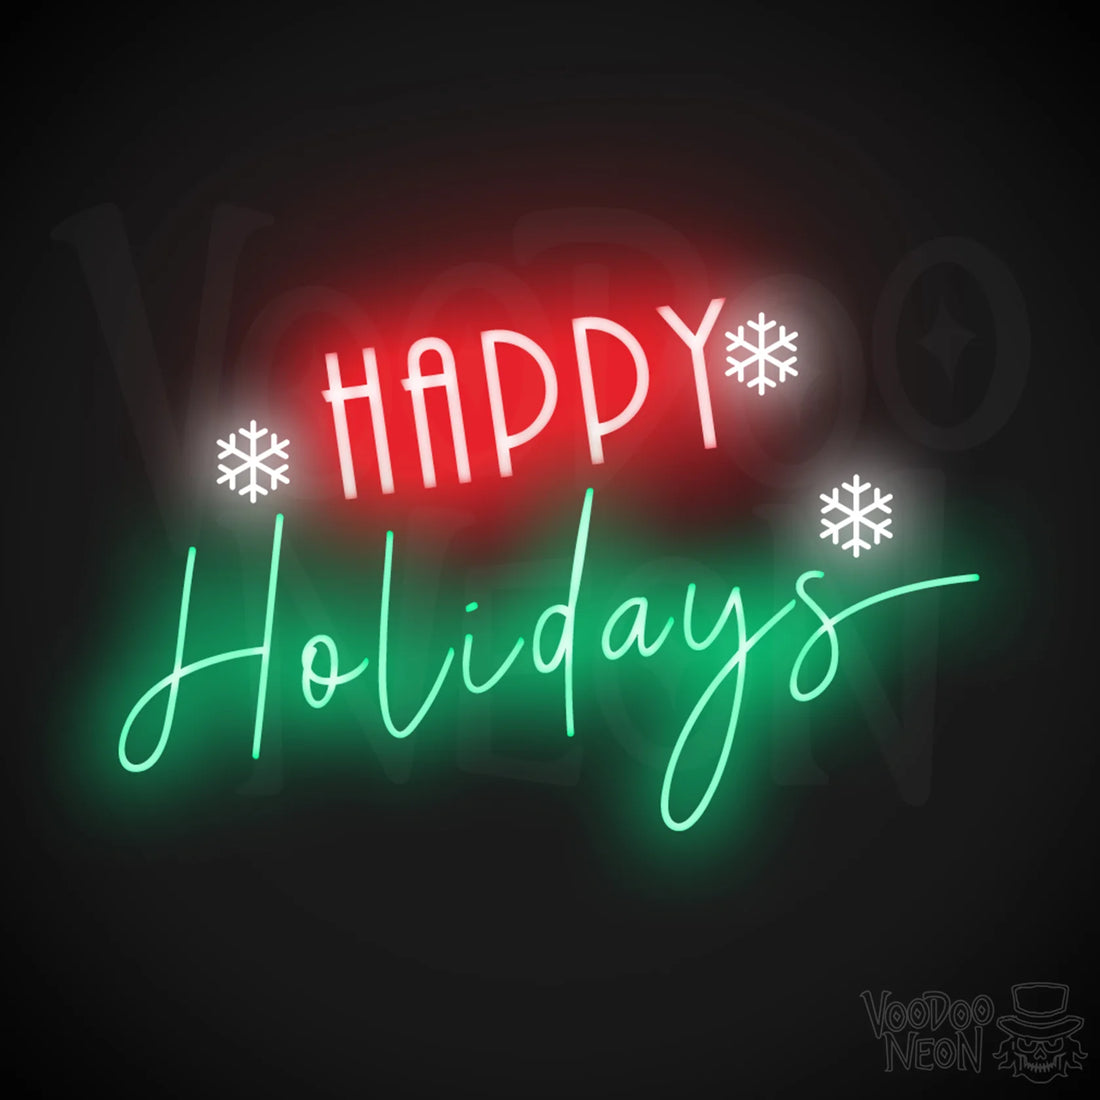 Neon signs for Christ and the holidays